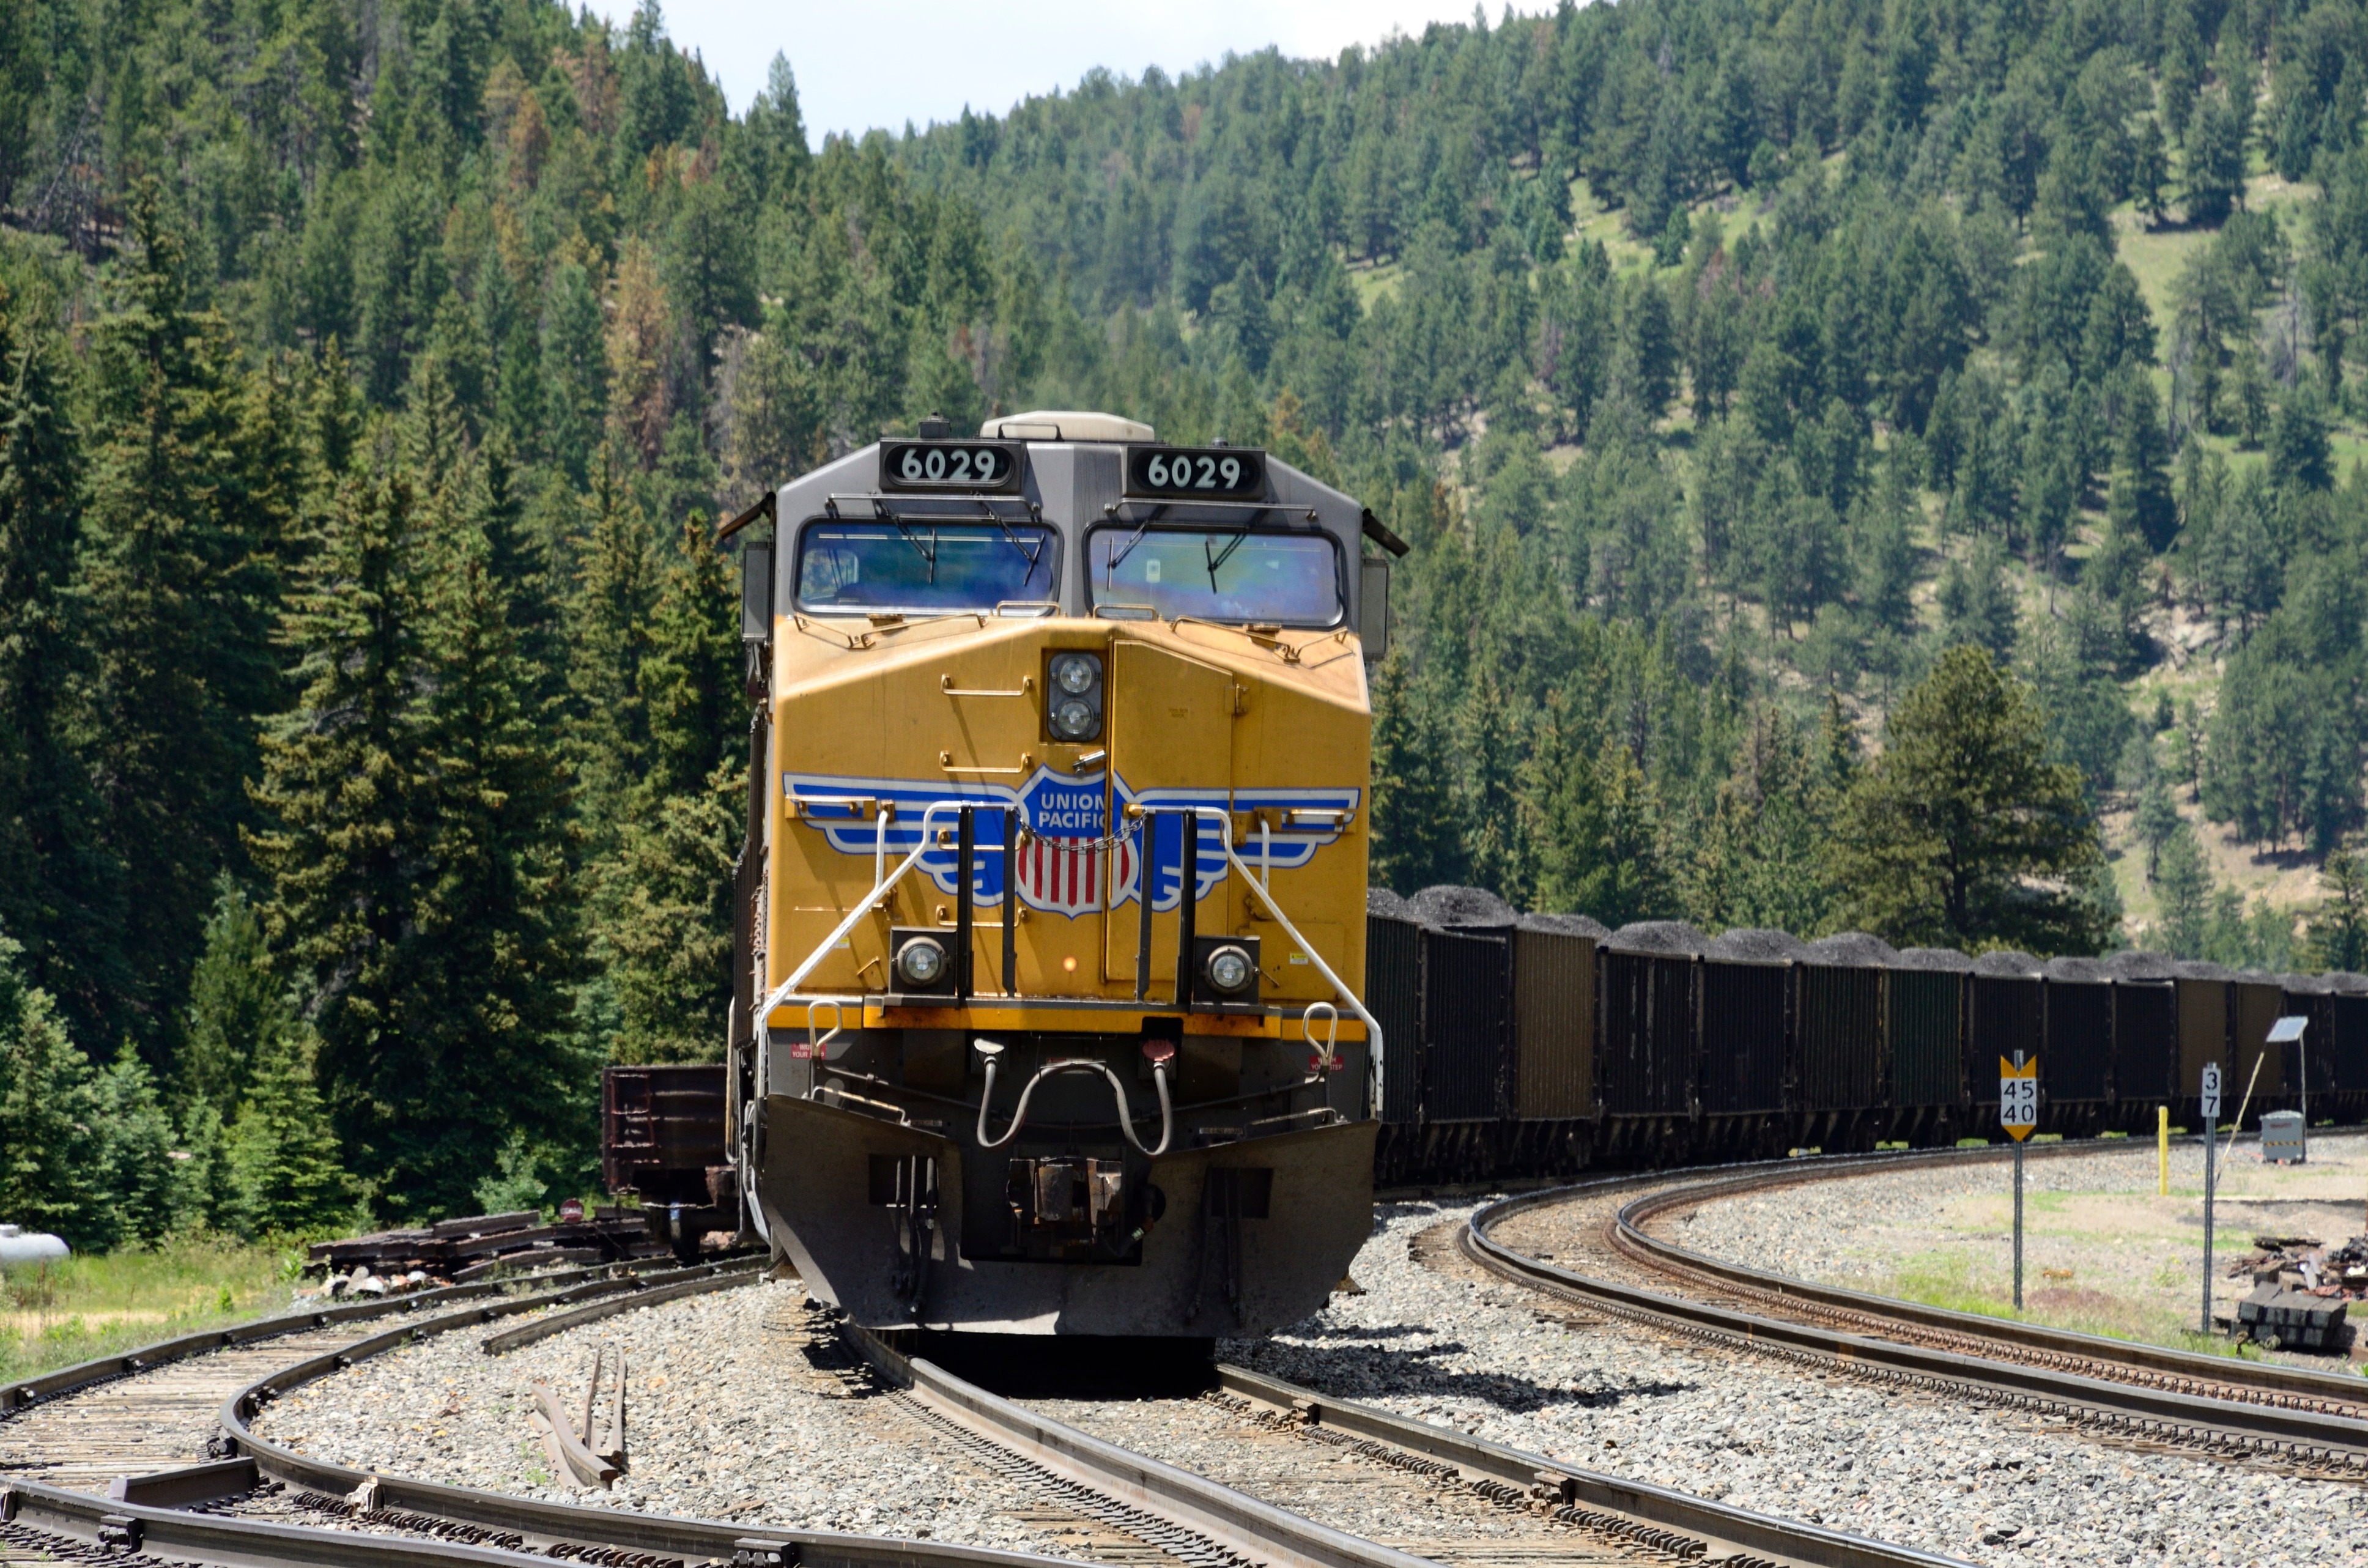 CO 986 UP Coal Train in Pinecliff _0446_D7K4741.jpg detail image